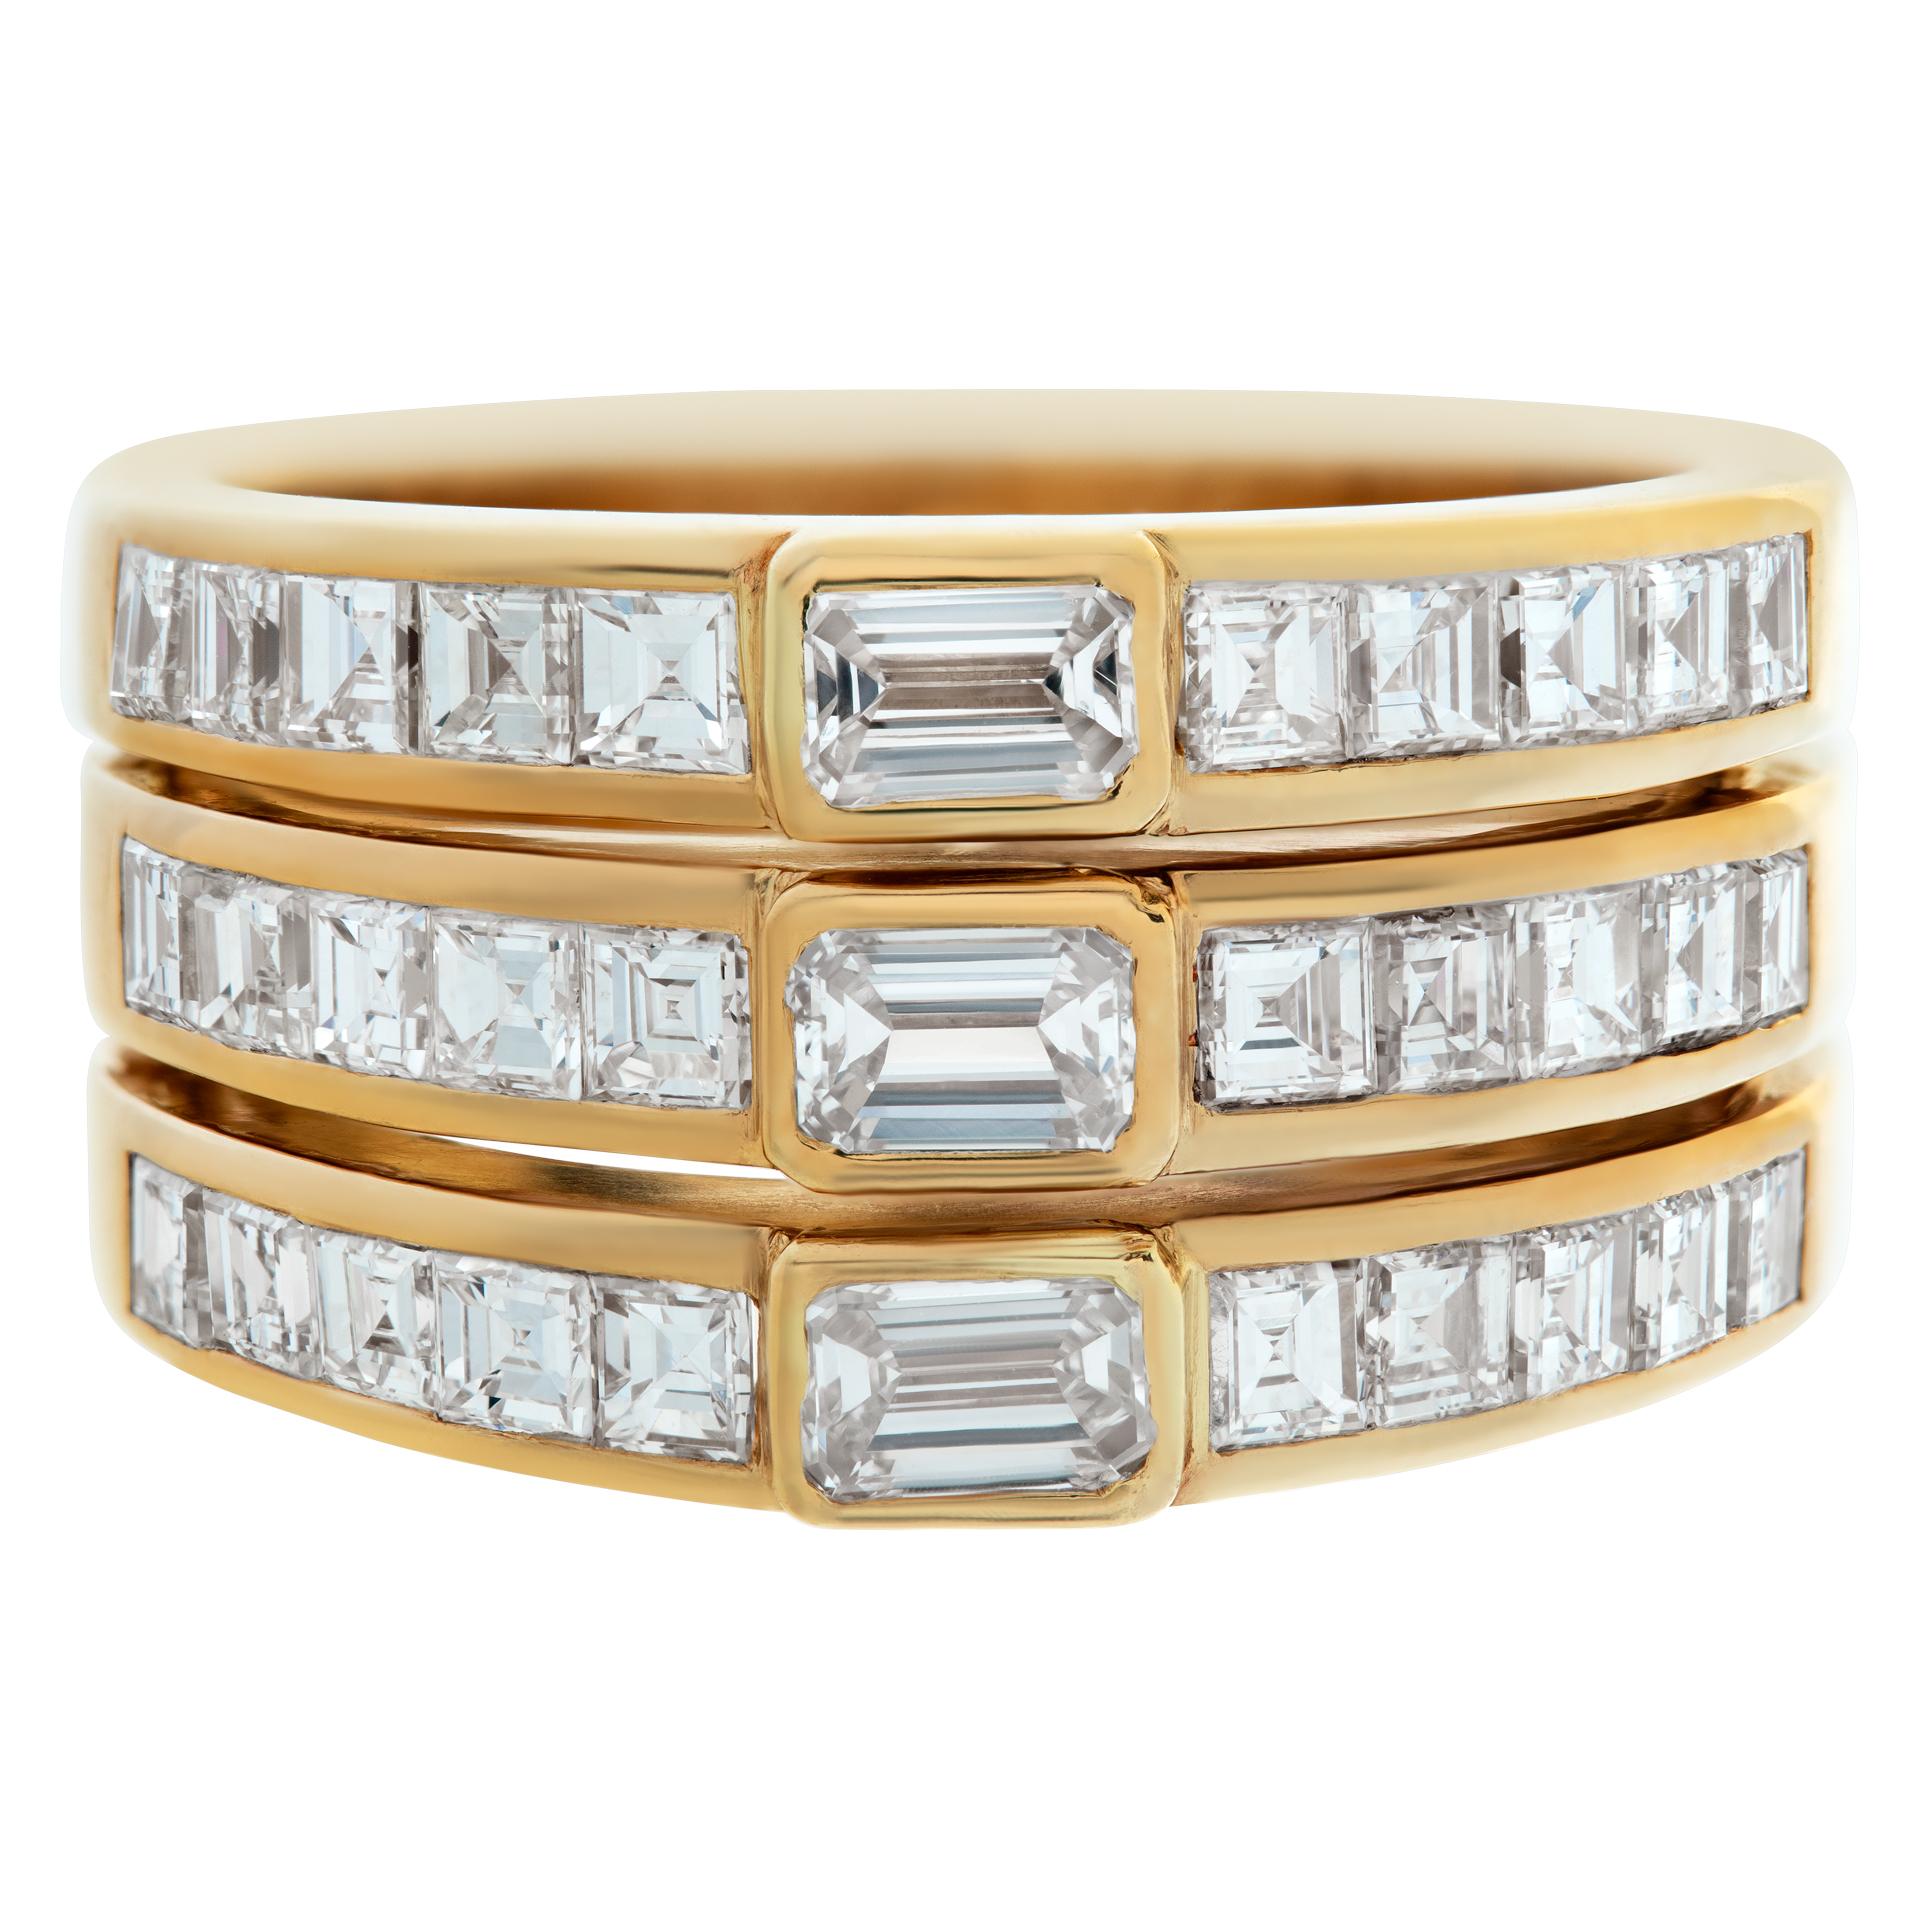 Three stacked diamond rings in 18k yellow gold with approximately 0.50 carats in center emerald cut diamonds (H-I color, VS clarity) and 2.25 carats in asscher cut diamonds (G-H color, VS clarity). Ring size 5.75This Diamond ring is currently size